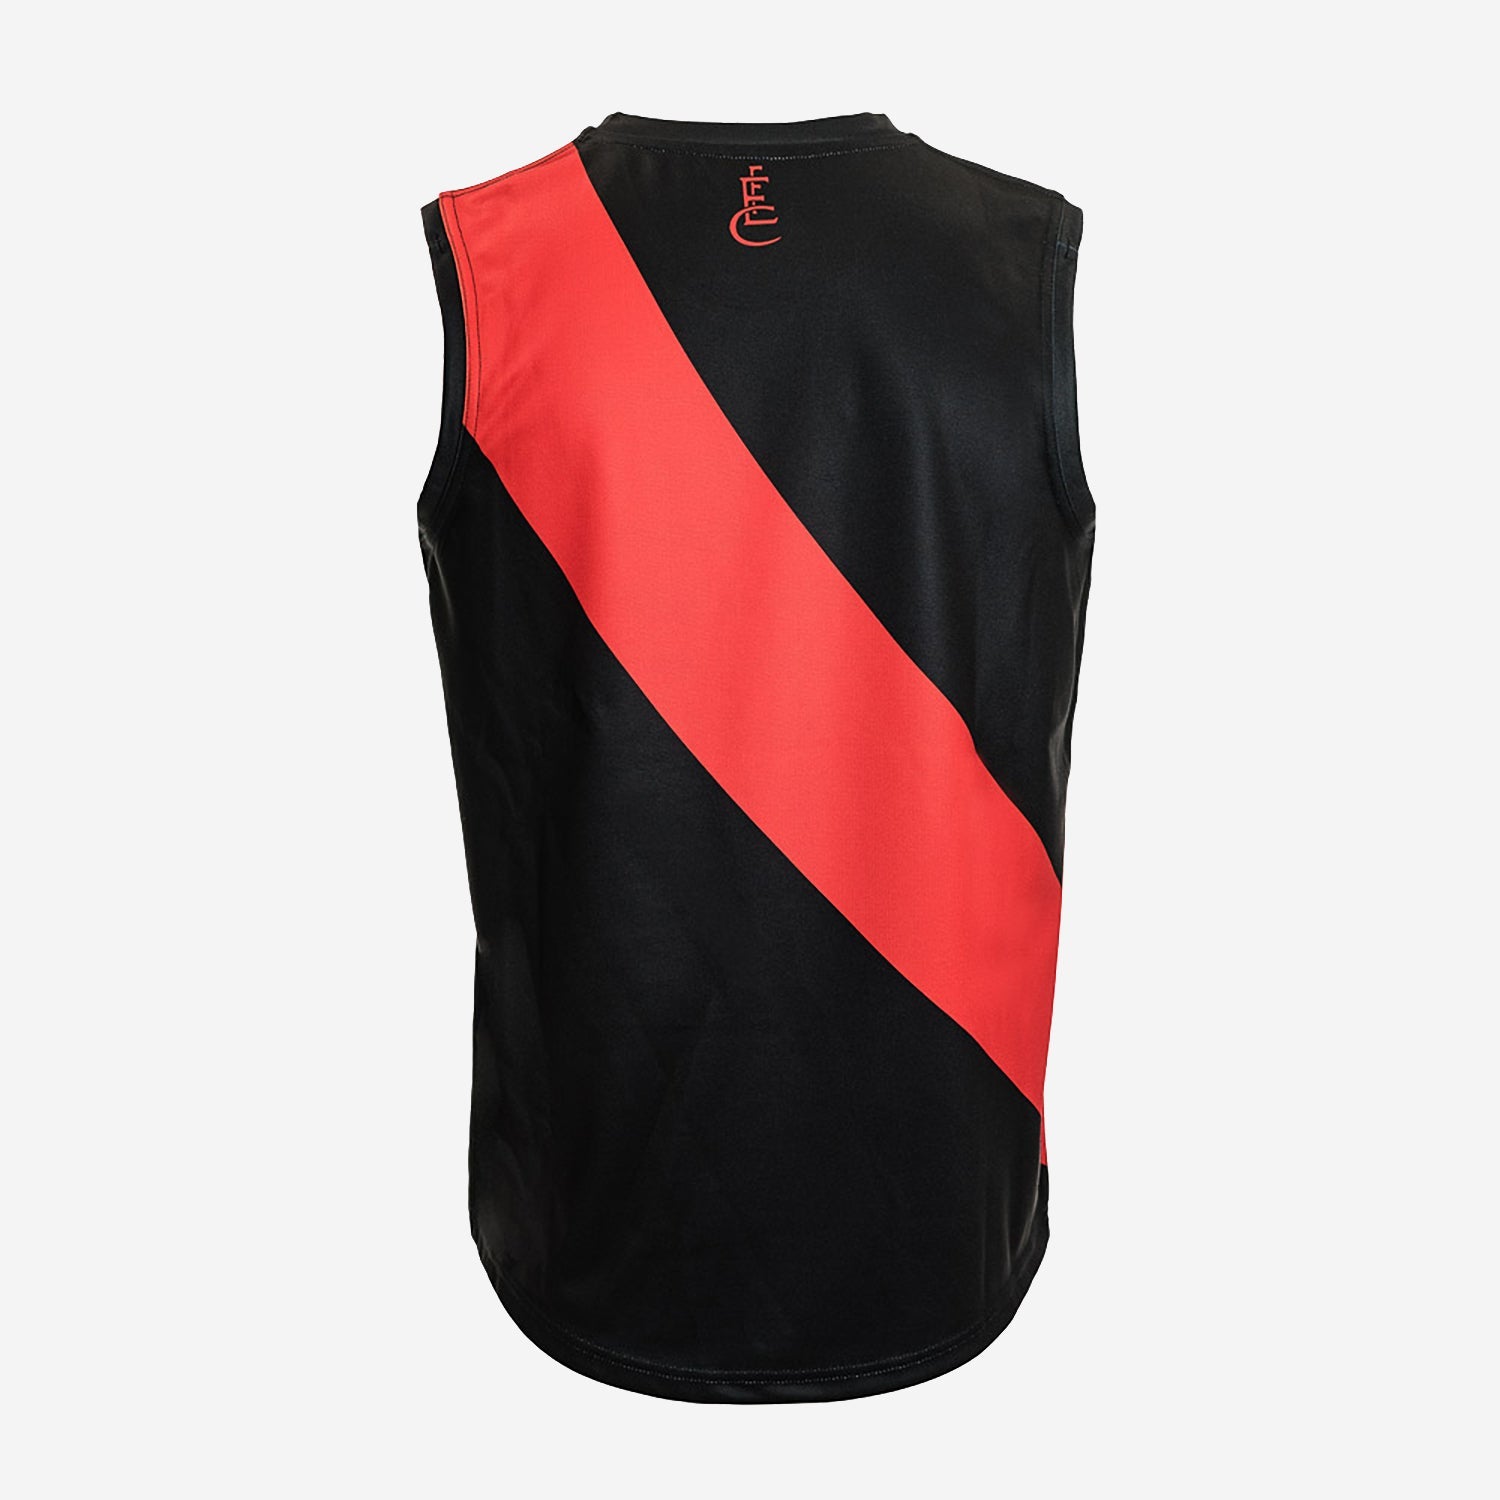 Essendon Bombers - AFL Replica Adult Guernsey